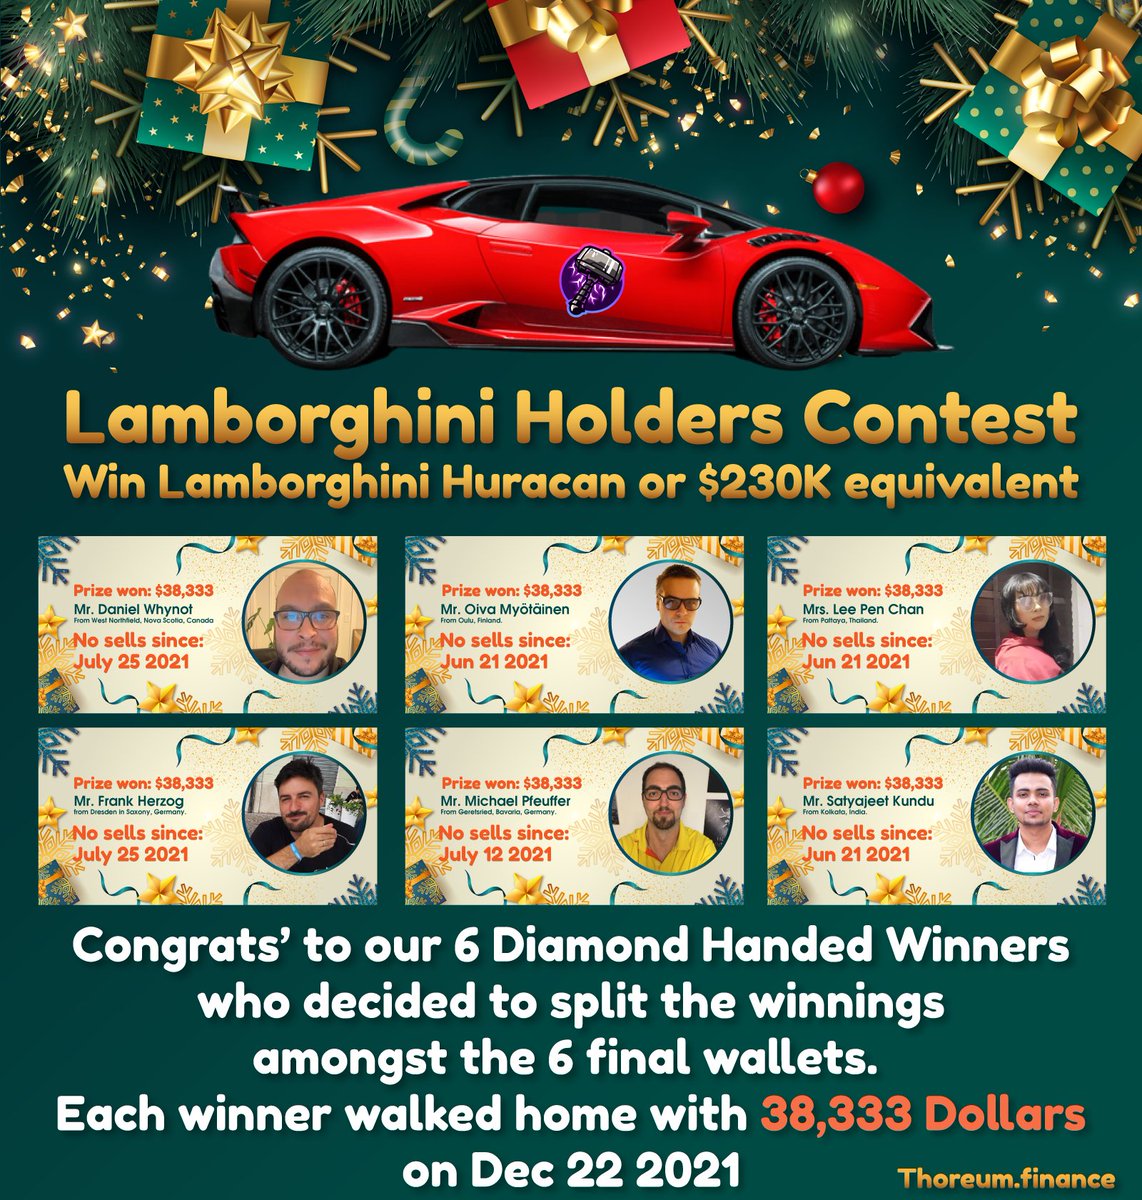 🎁LAMBO HOLDERS CONTEST: WINNERS PRIZE DELIVERED ON DEC 22 2021🏎 🎉Congrats to all 6 Diamond Handed! Each winner walked home with 38,333 Dollars ($230,000/6) For those that missed the livestream check it out here 👉 youtube.com/watch?v=ZBe9Ar… Details: t.me/ThoreumOfficia…